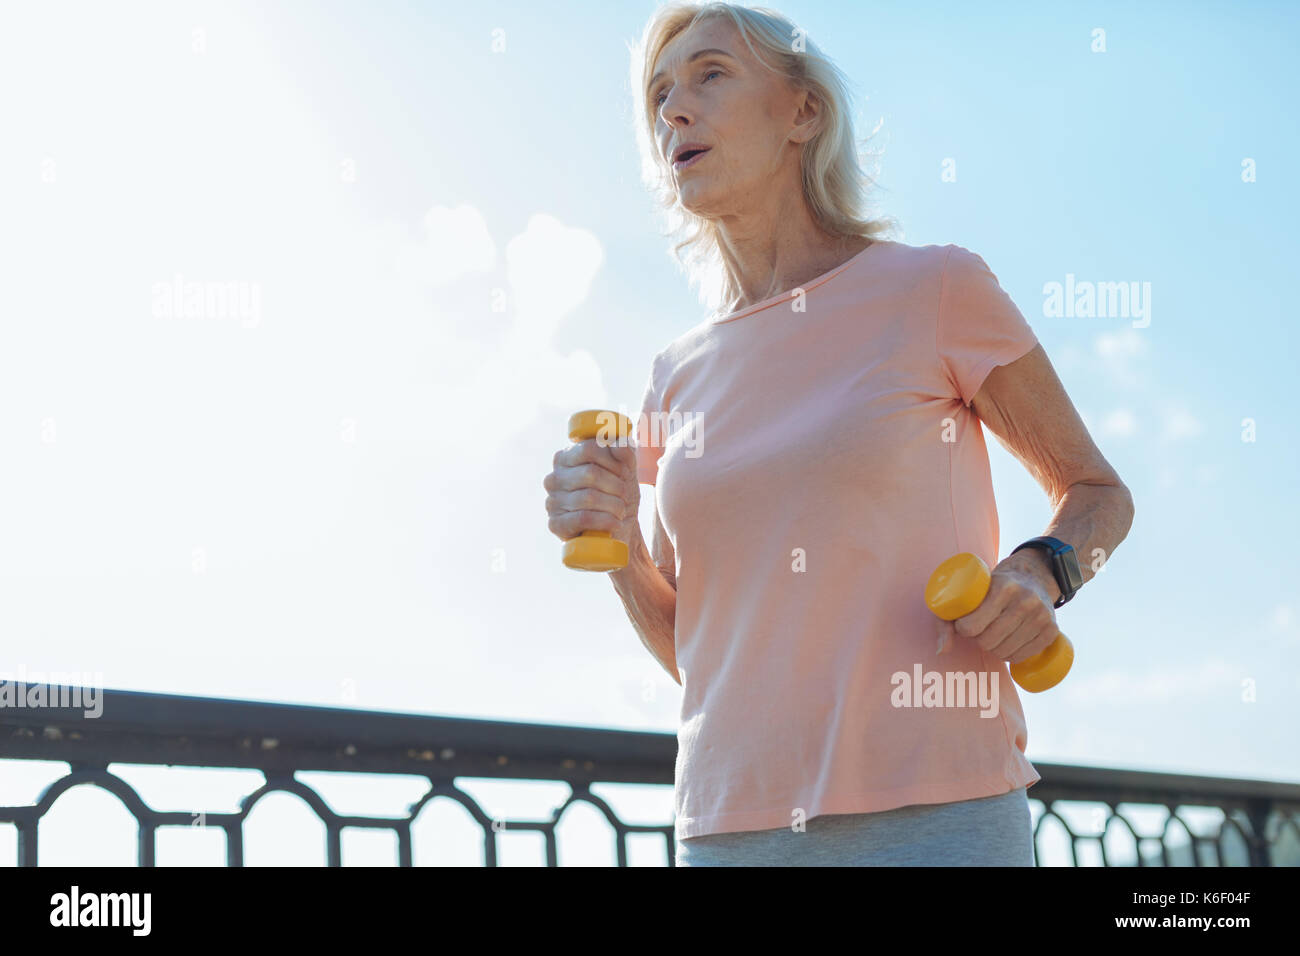 Athletic woman running with dumbbells Banque D'Images